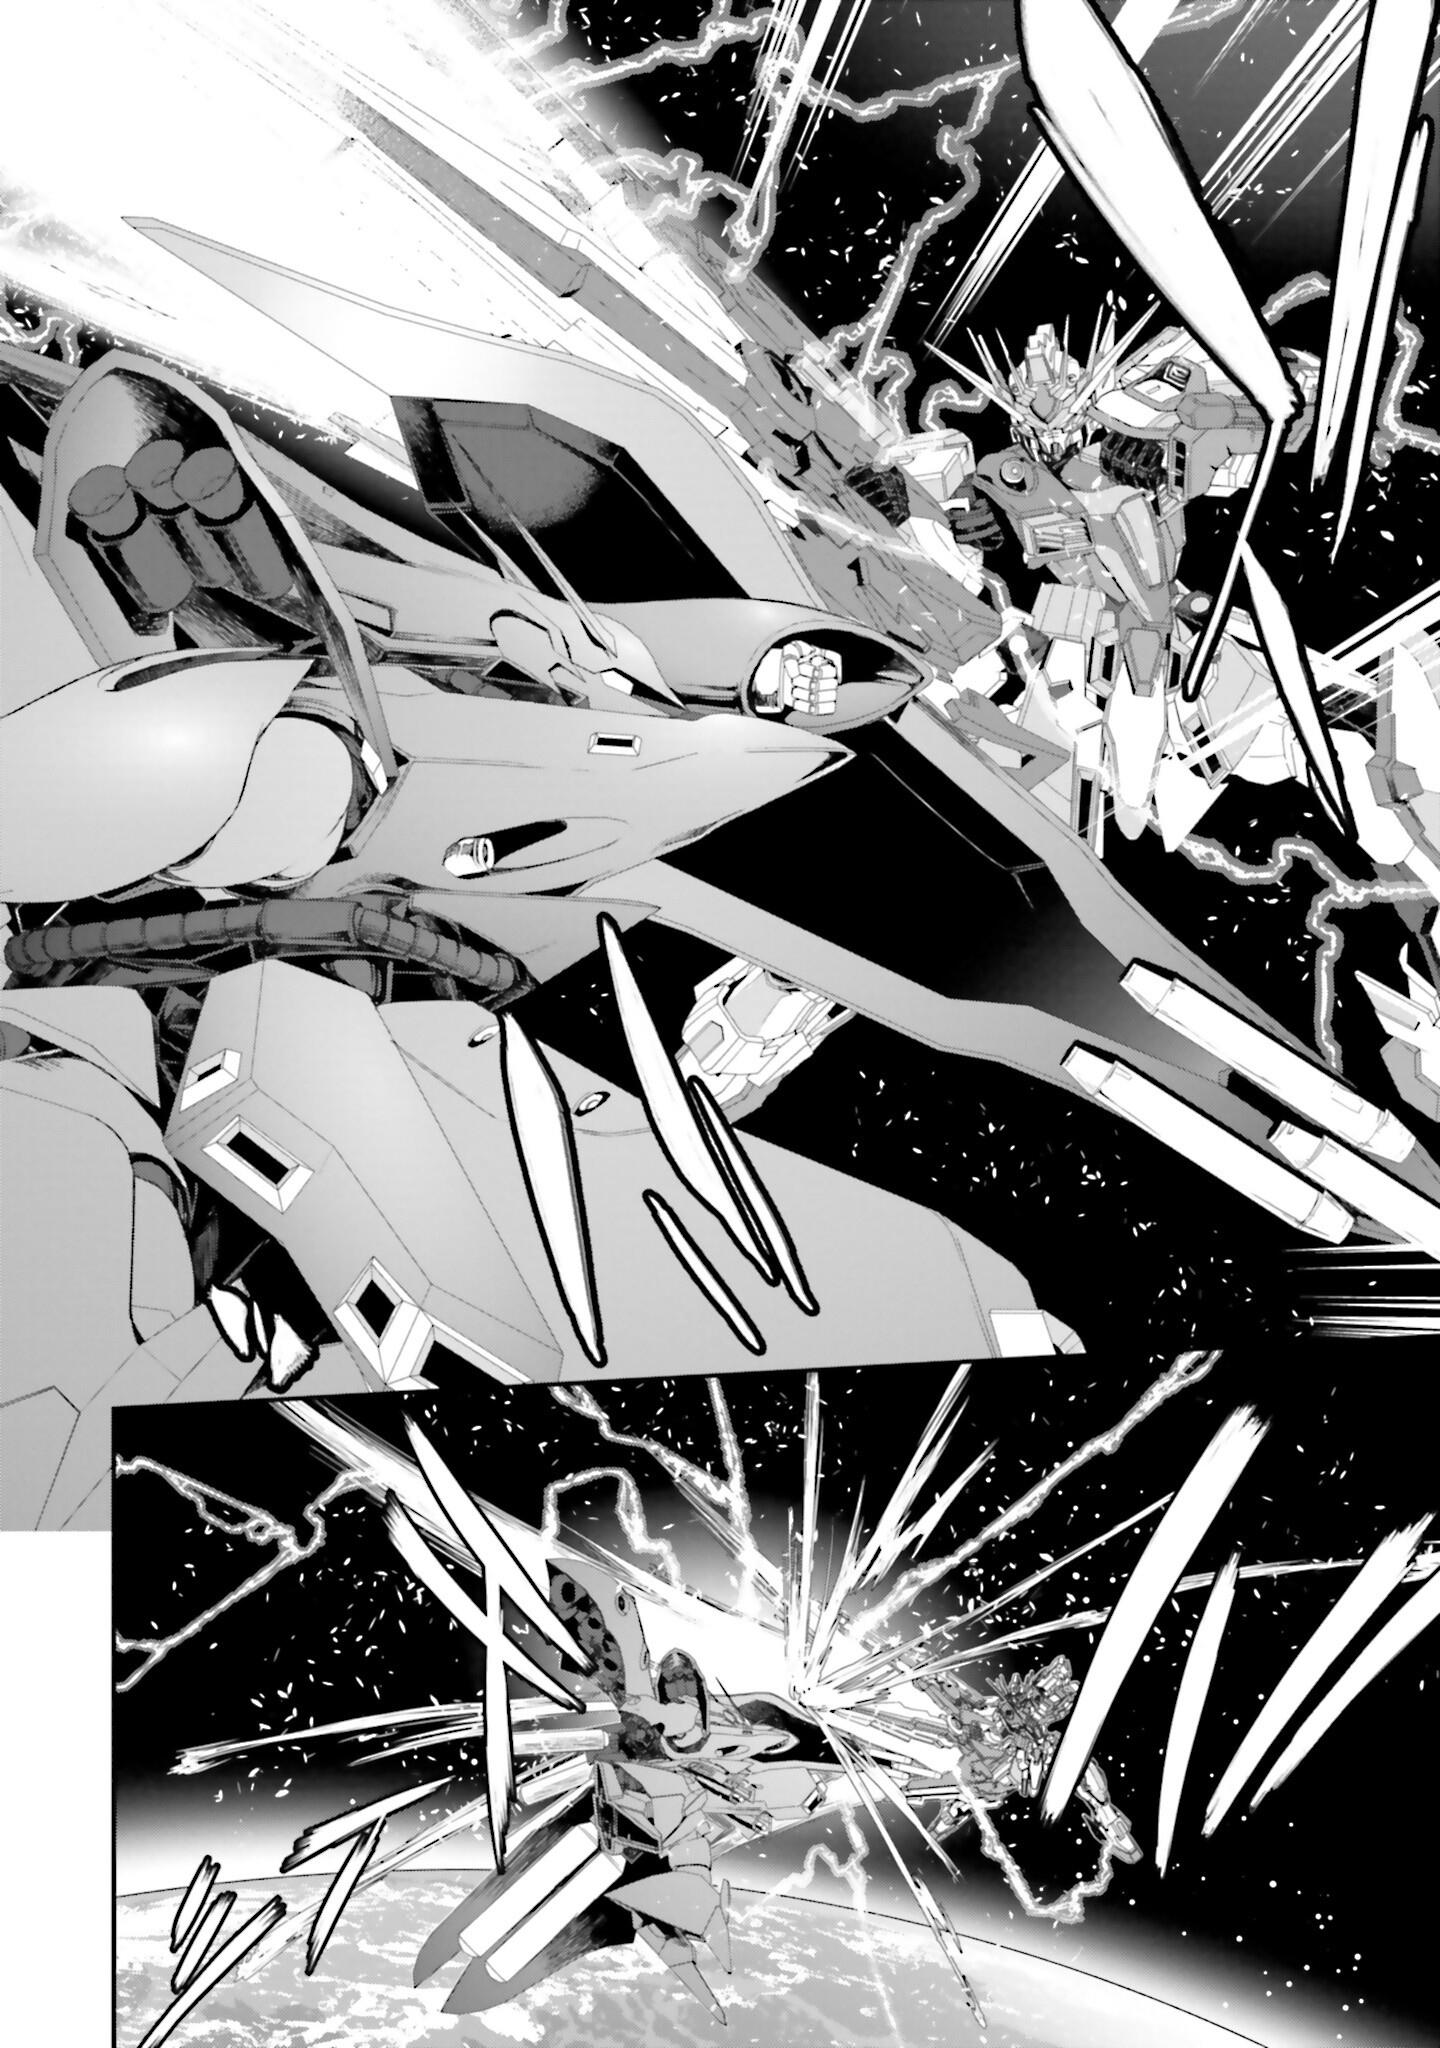 Mobile Suit Gundam N-Extreme Vol.1 Chapter 6: Mission 6 [Beyond The Axis] -Part 3- - Picture 2